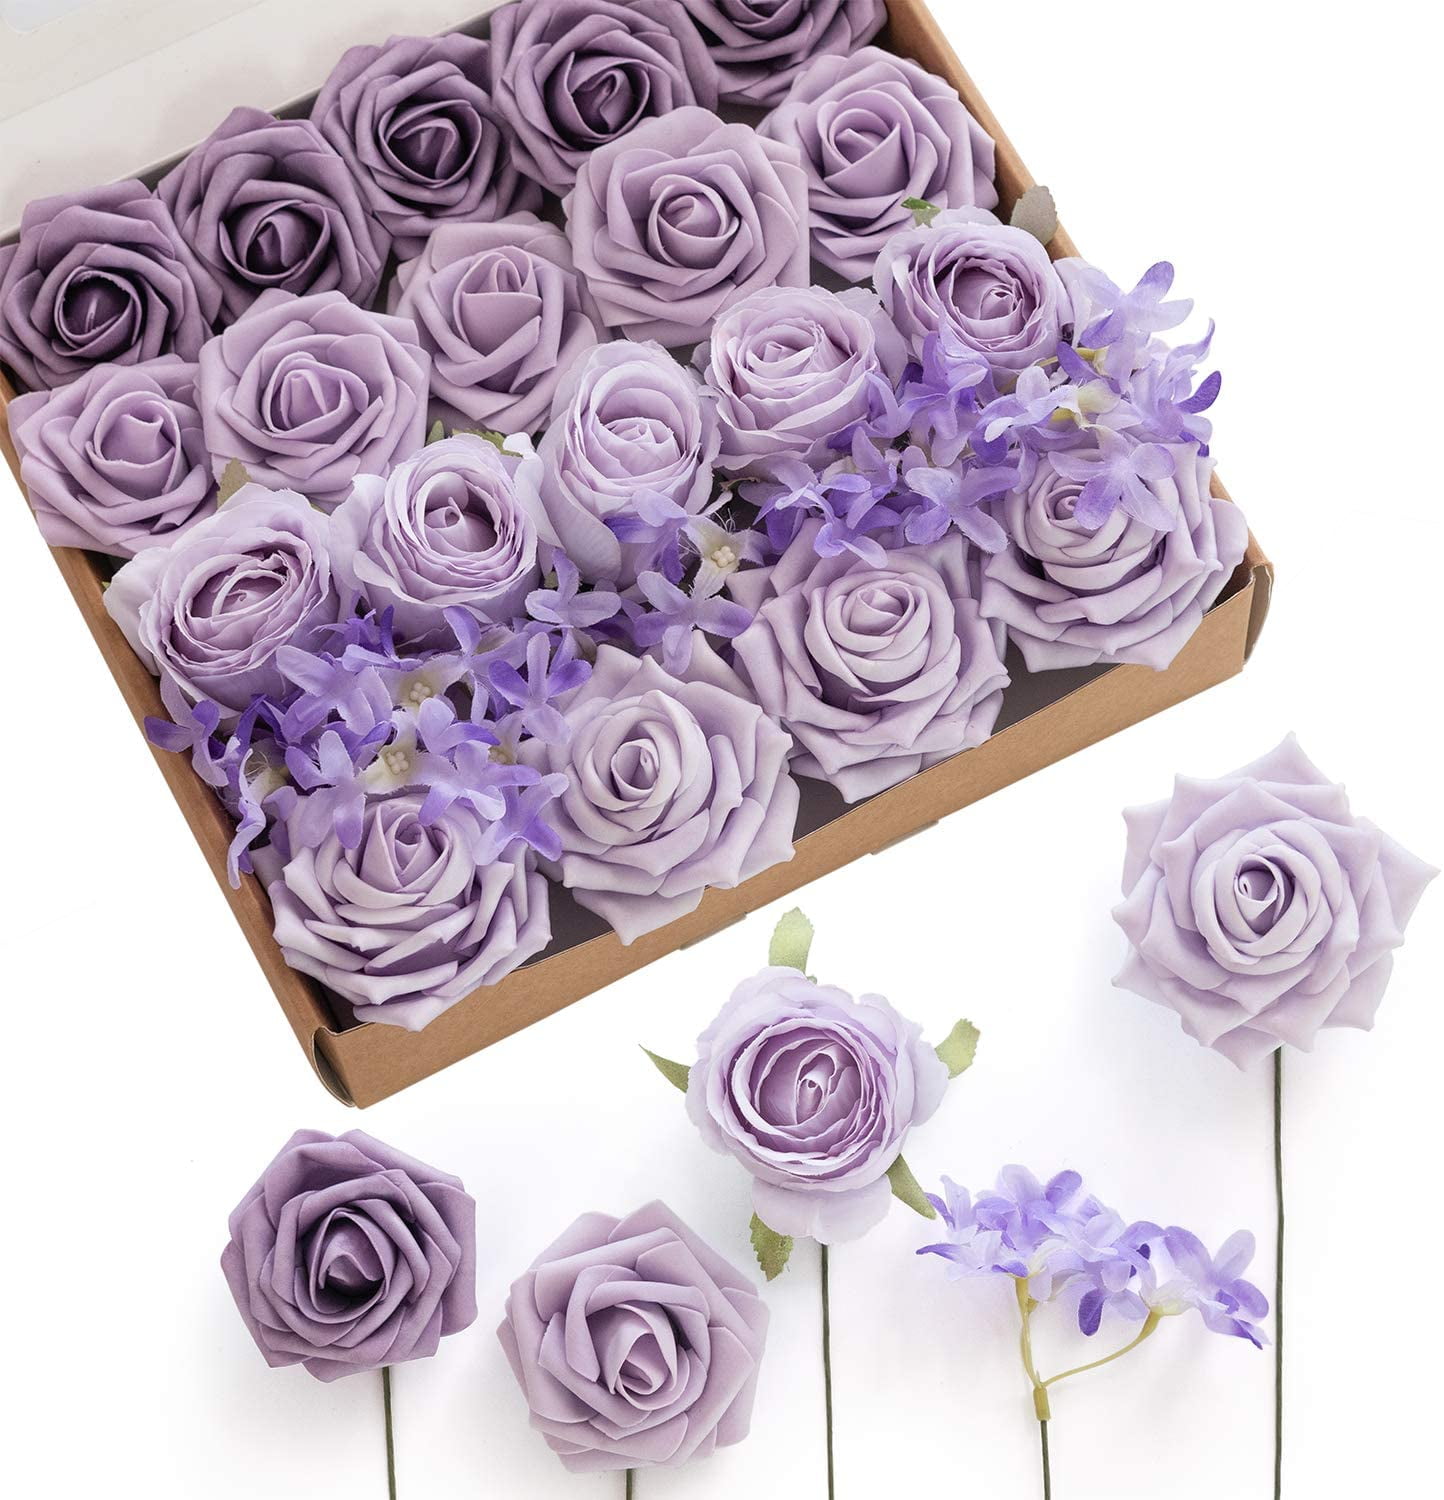 Artificial Flowers Realistic Ombre Colors Mauve Roses with Stem 